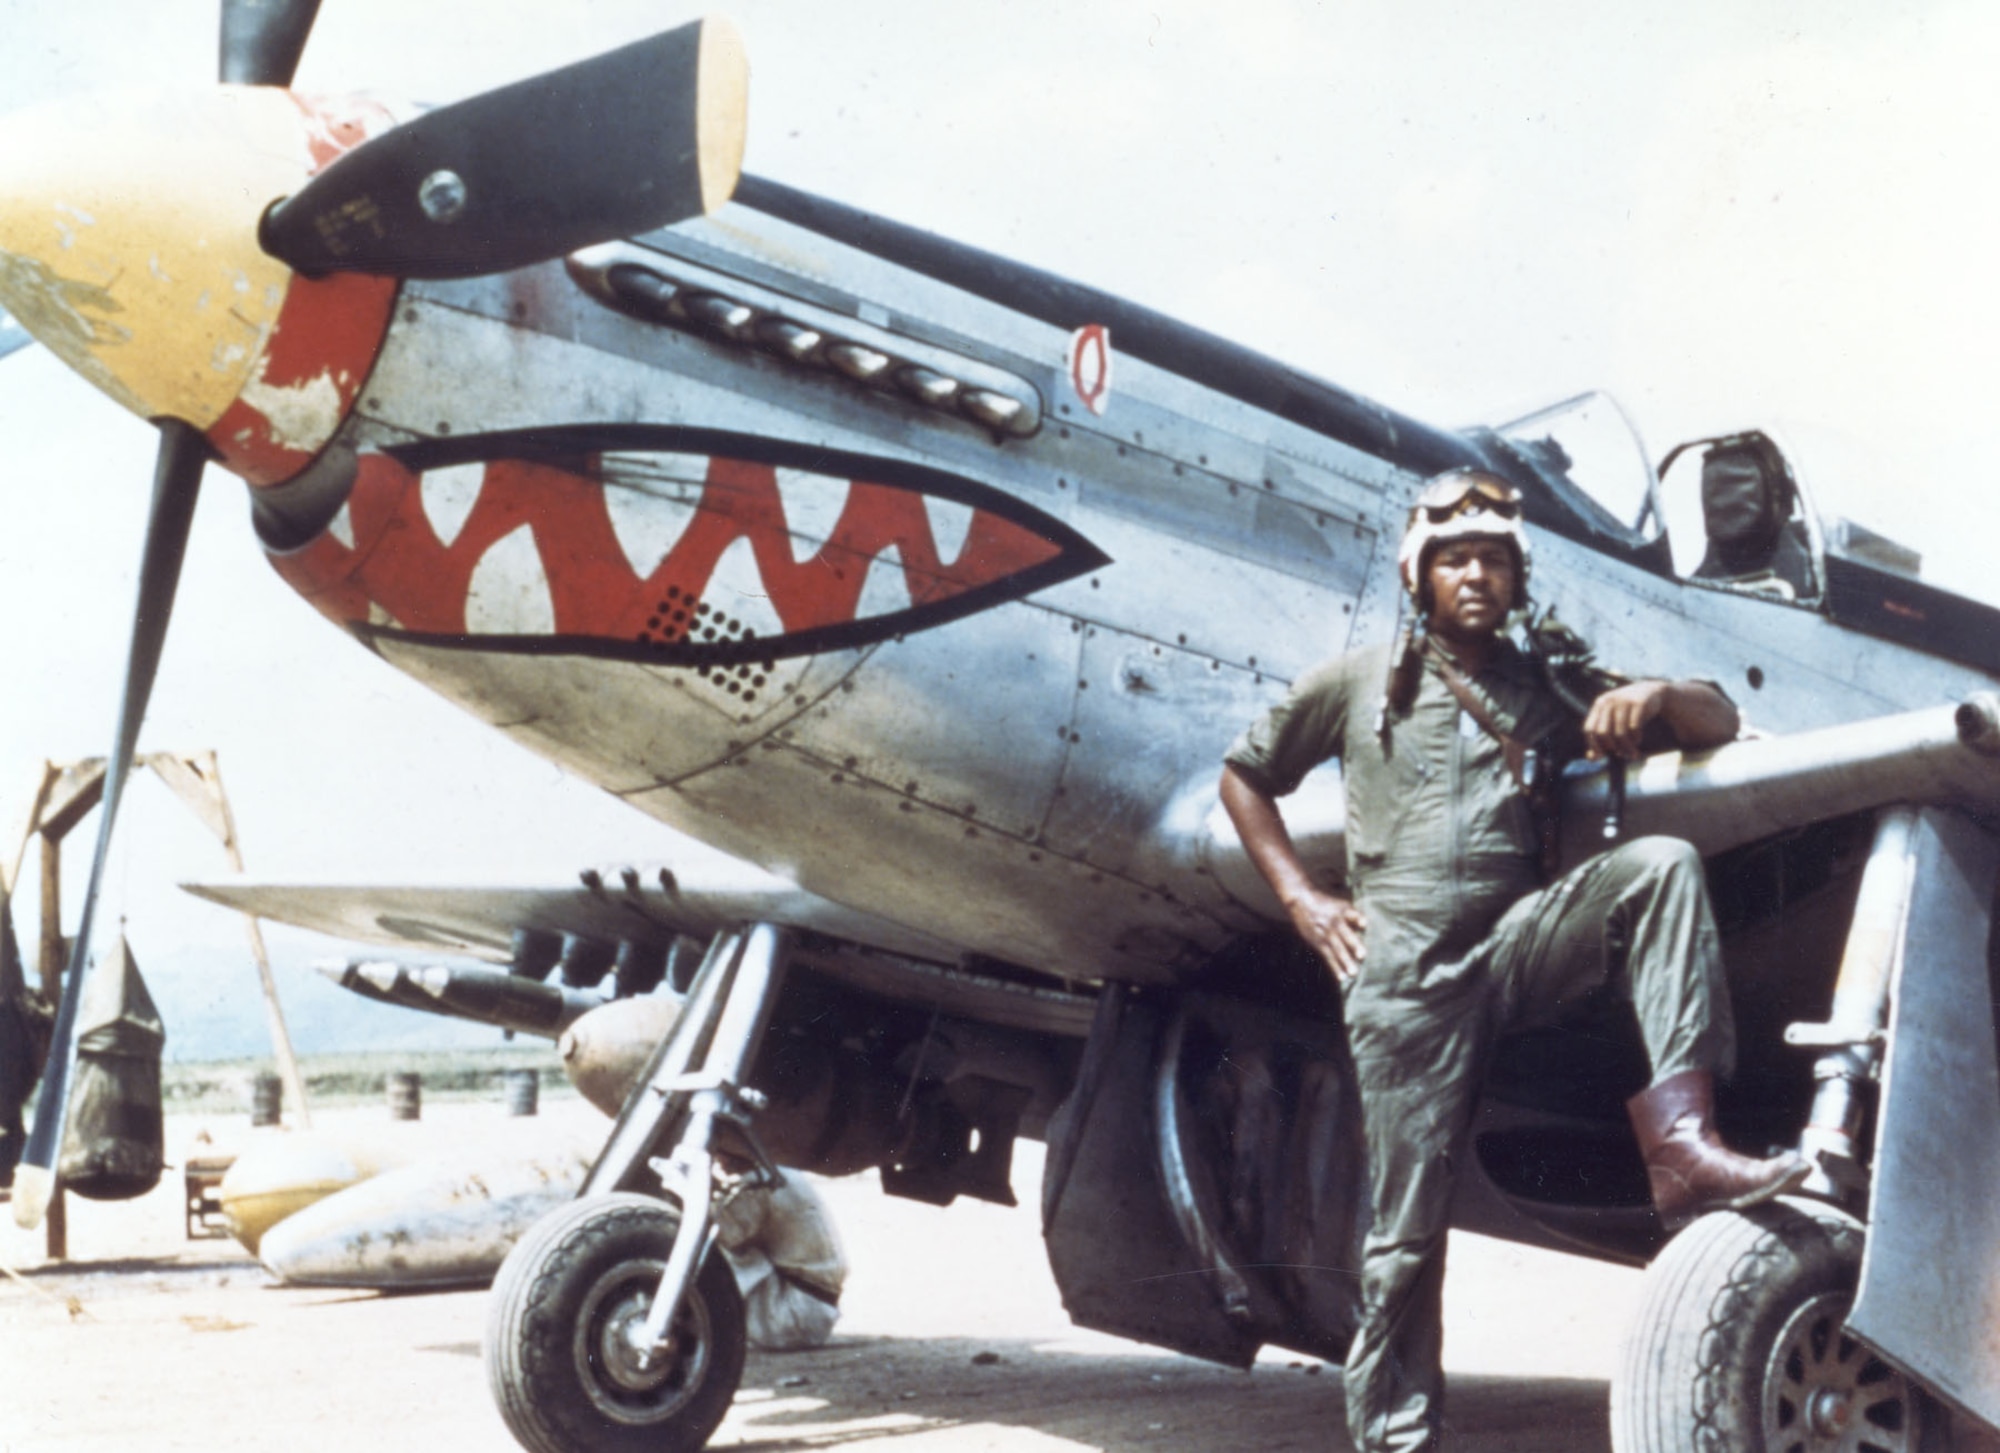 Lt. Daniel "Chappie" James in Korea. He later rose through the ranks to become the first African-American four-star general in the USAF. (U.S. Air Force photo)